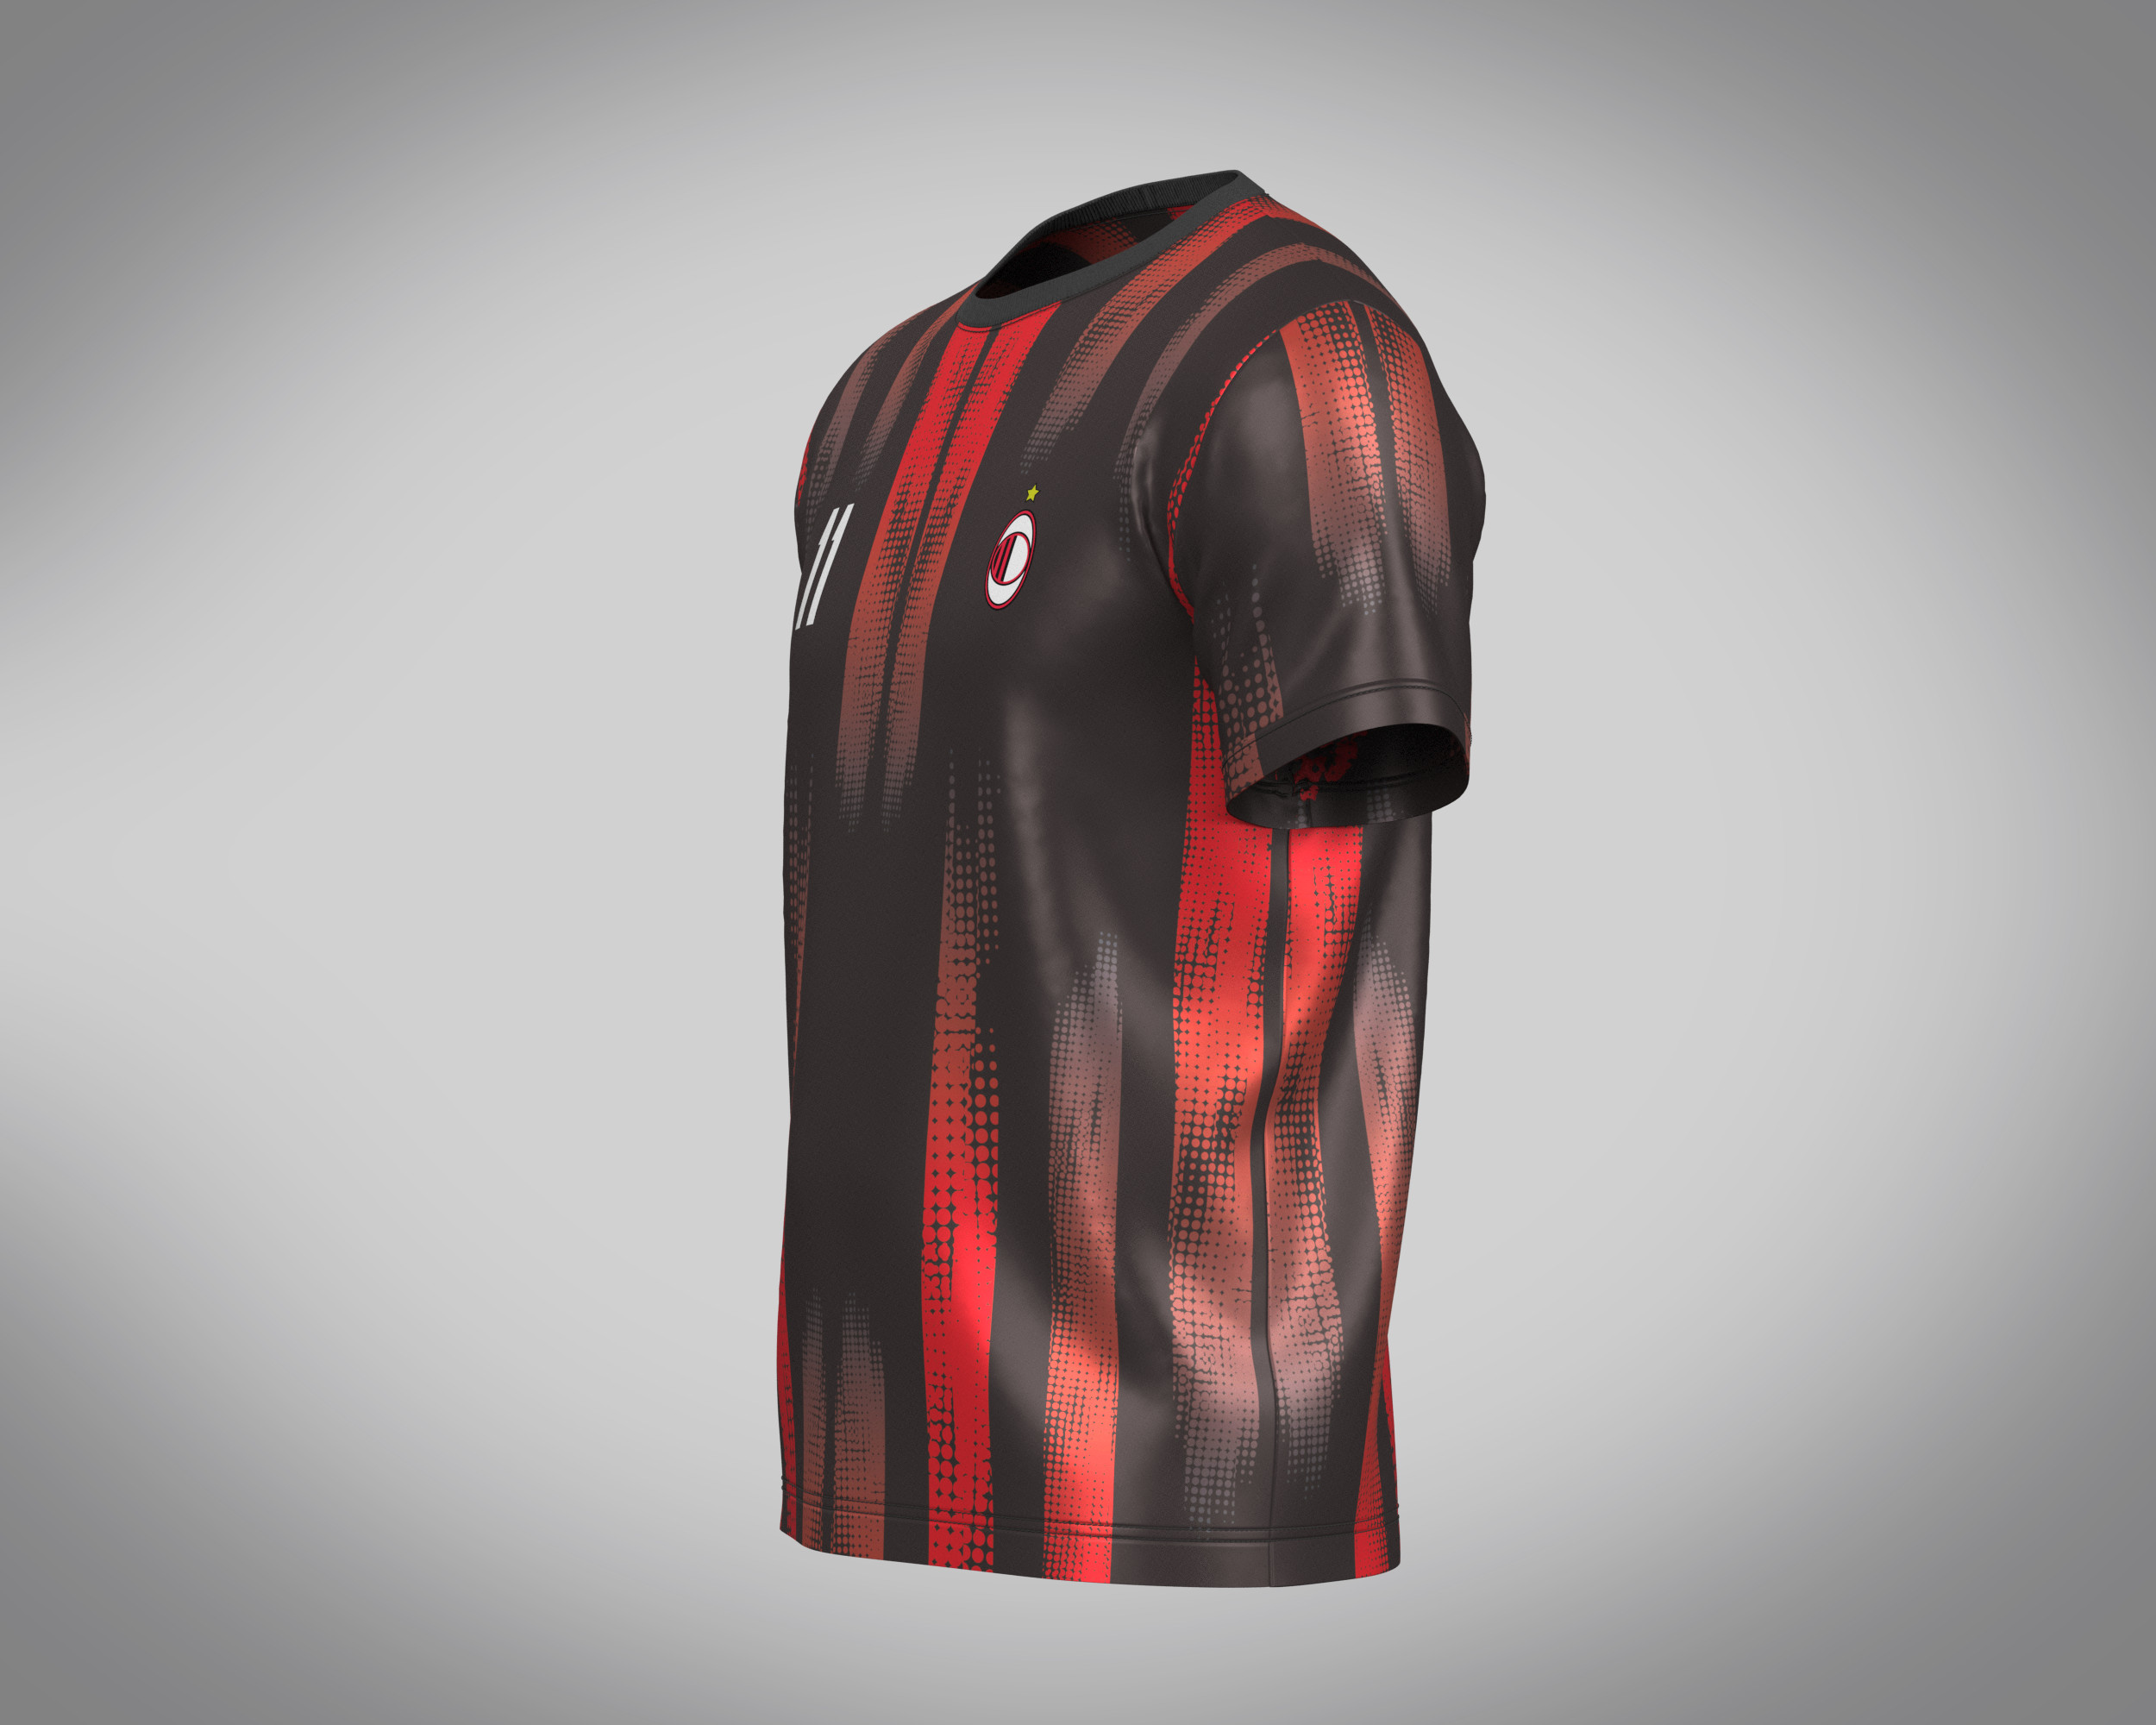 ArtStation - Soccer Football Black and Red Jersey Player-11